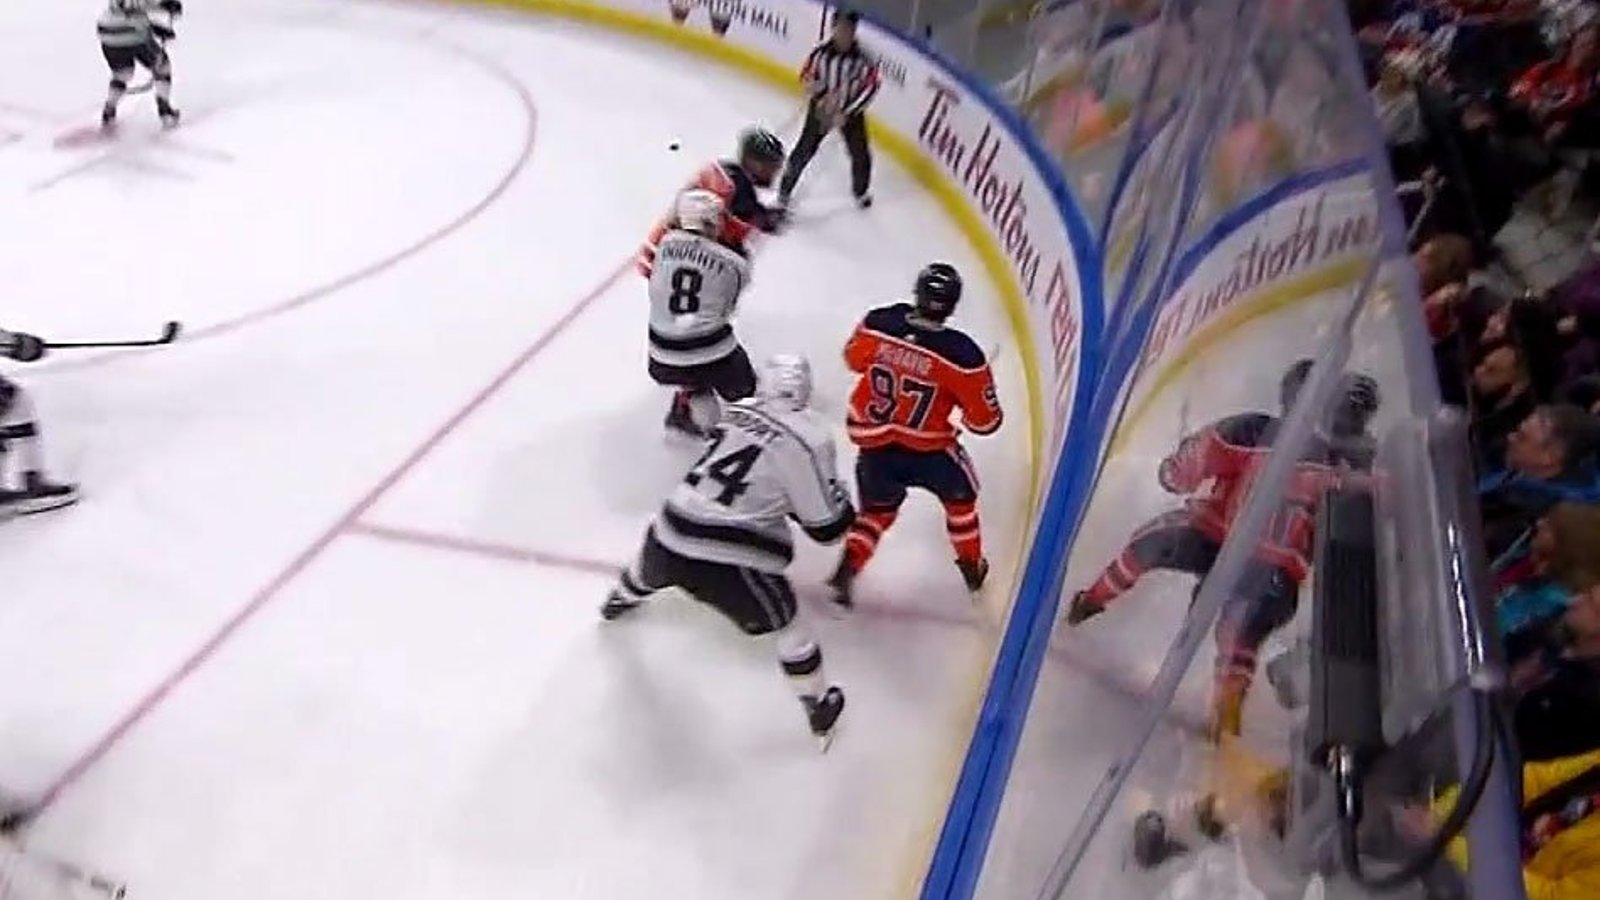 Must see: Maroon takes a cheap shot at Doughty and targets his head!